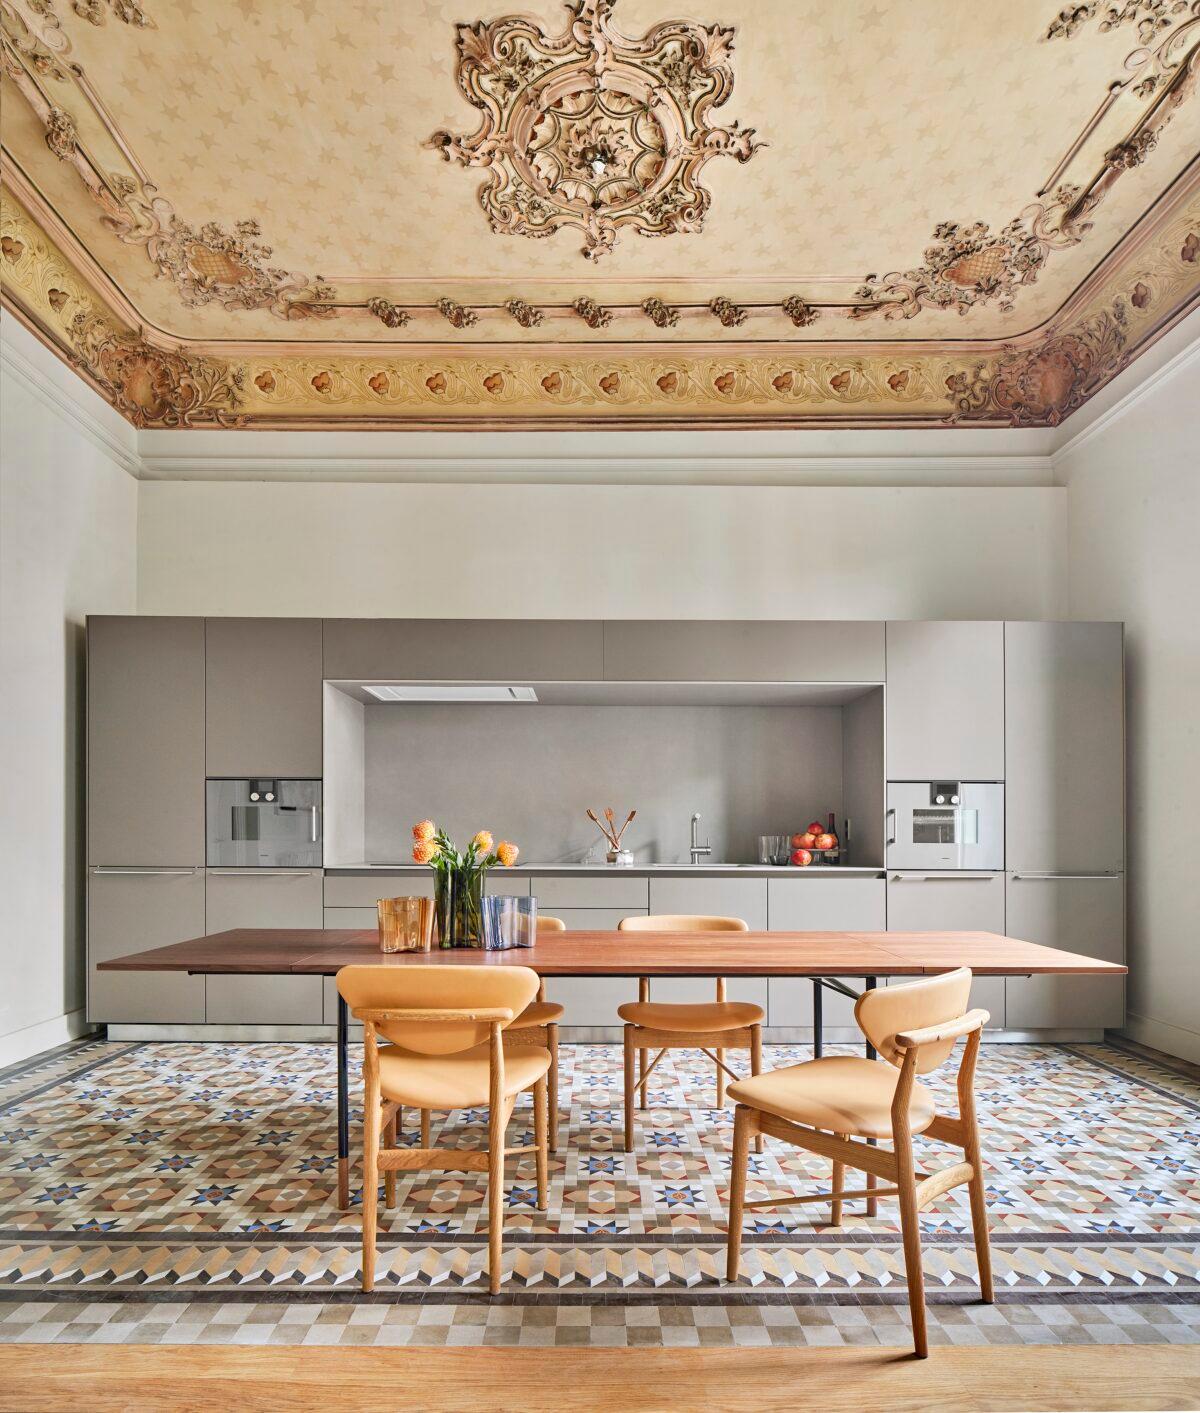 The flats and penthouses are versatile modern homes, embellished with inspiration from the past. (Jordi Folch and Jose Hevia)